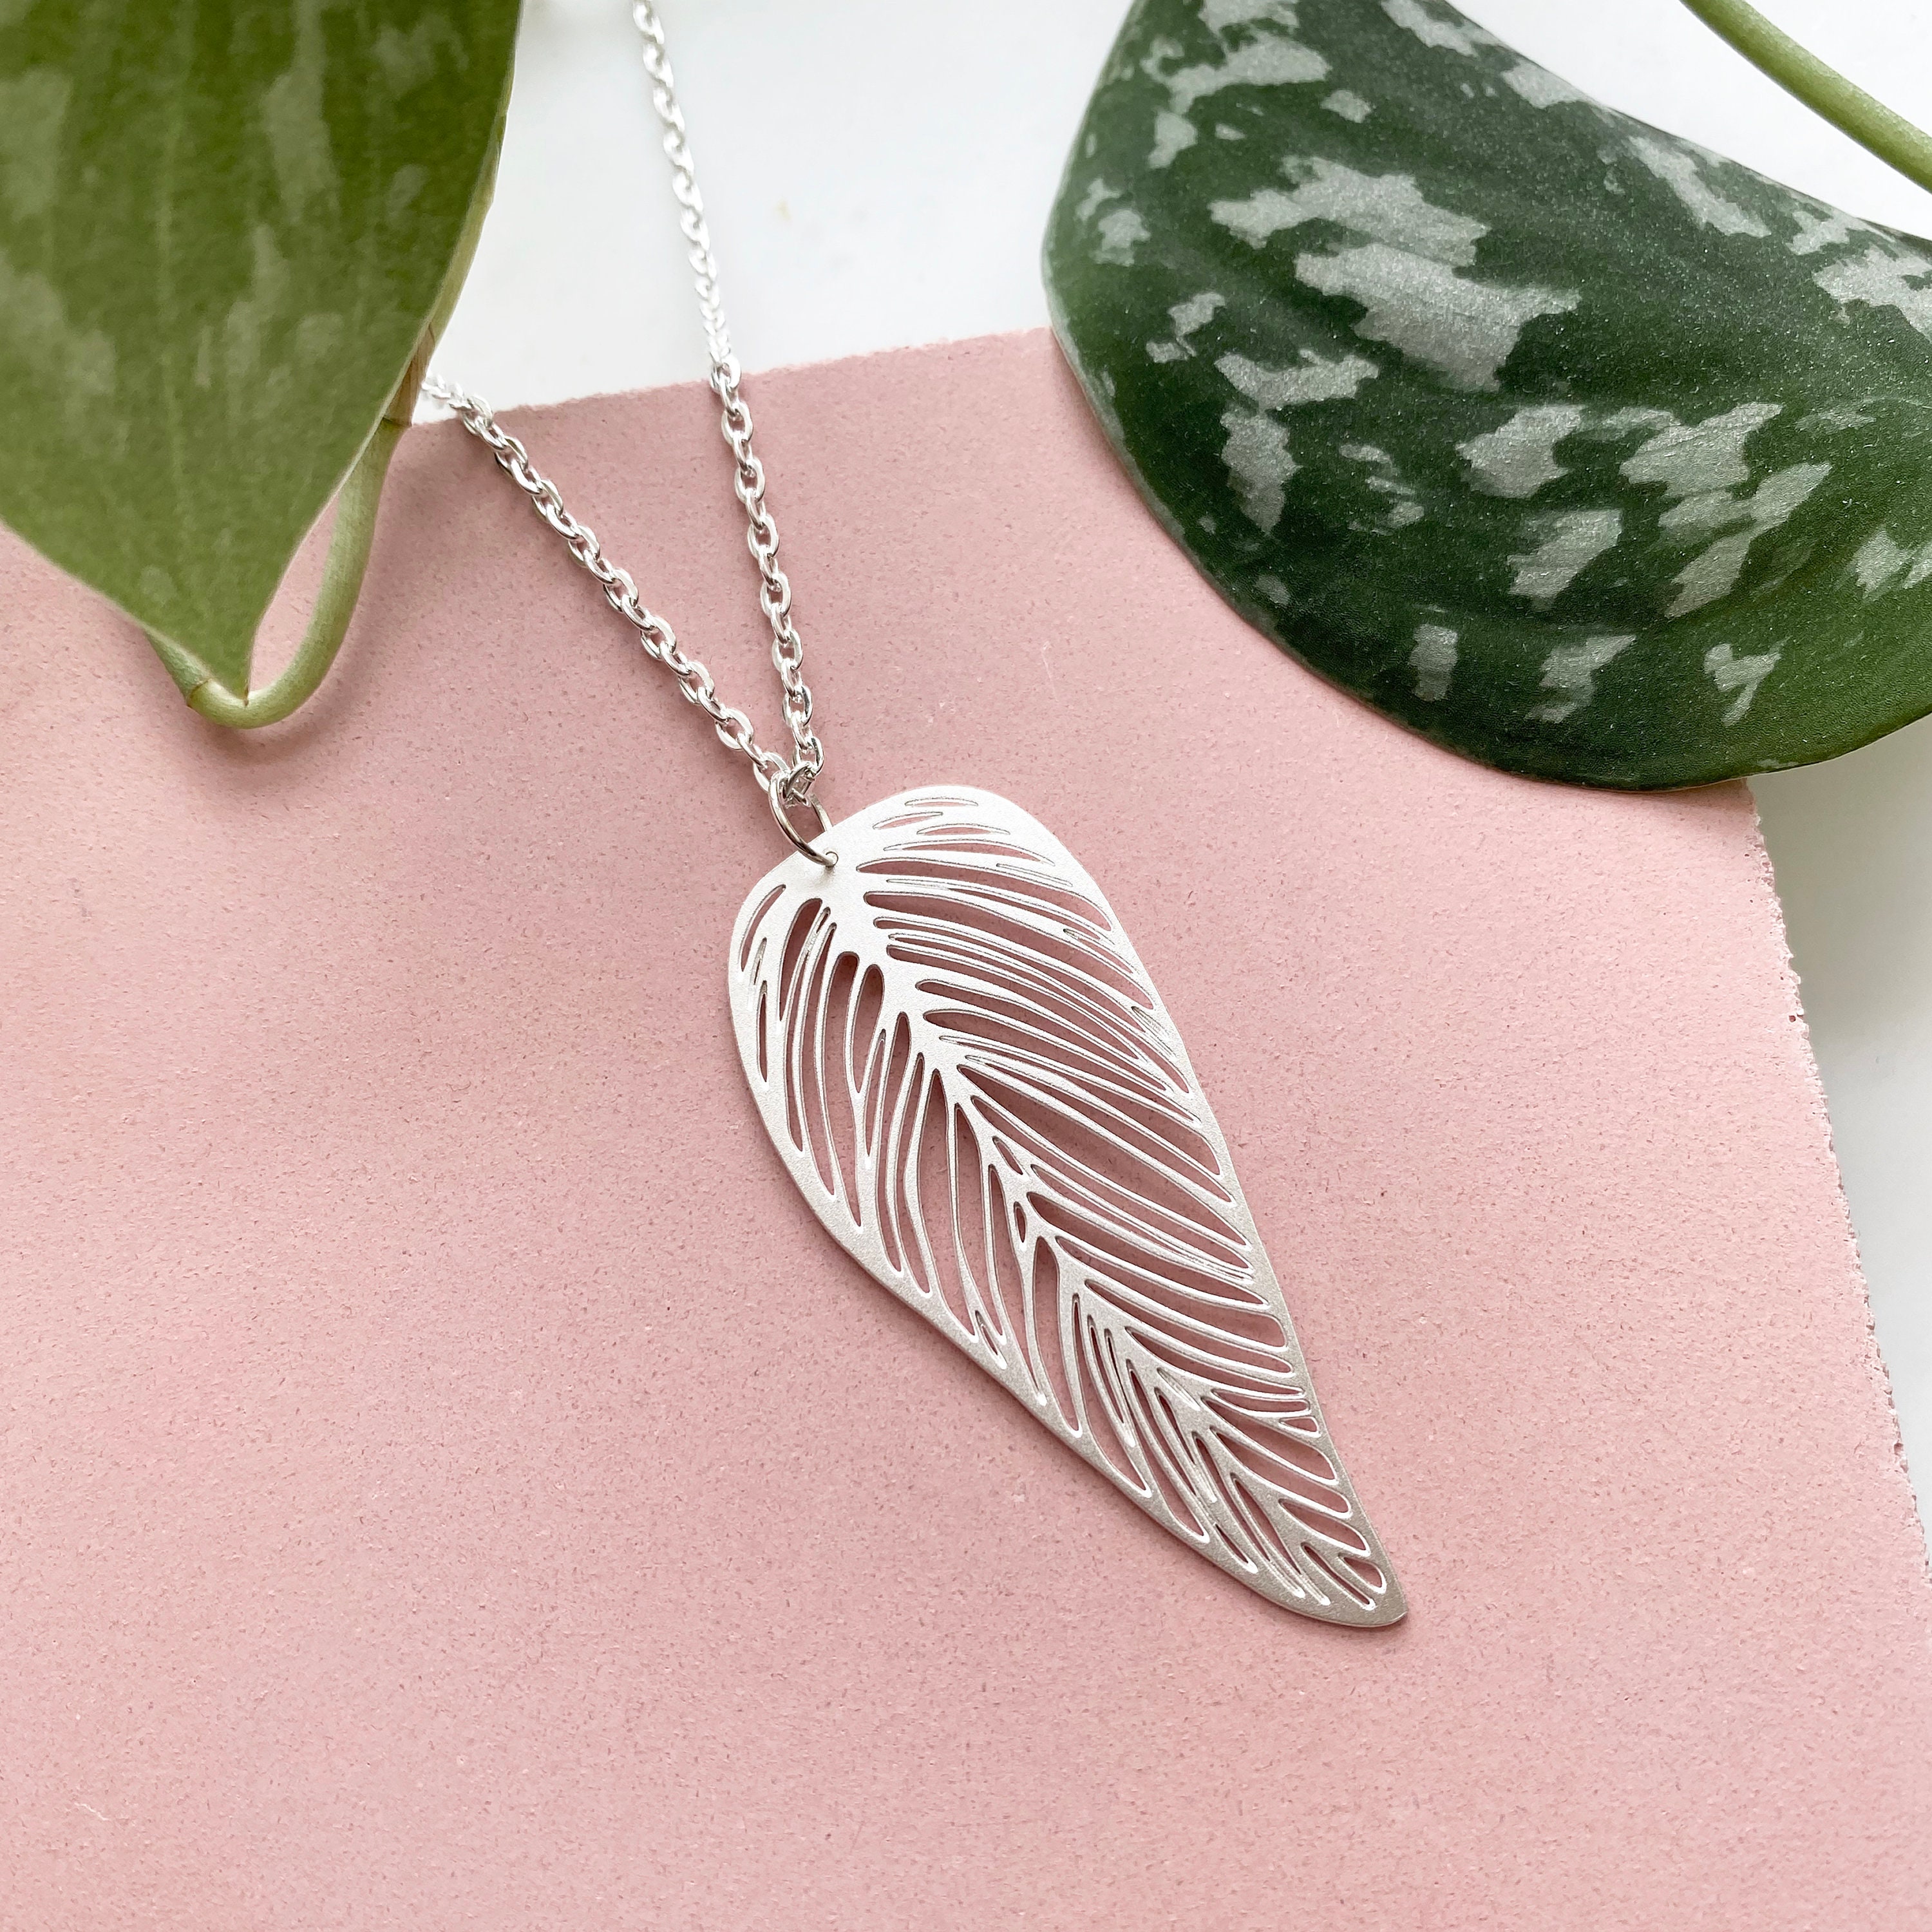 Delicate Silver Leaf Necklace - Pendant House Plant Jewellery Gift For Her